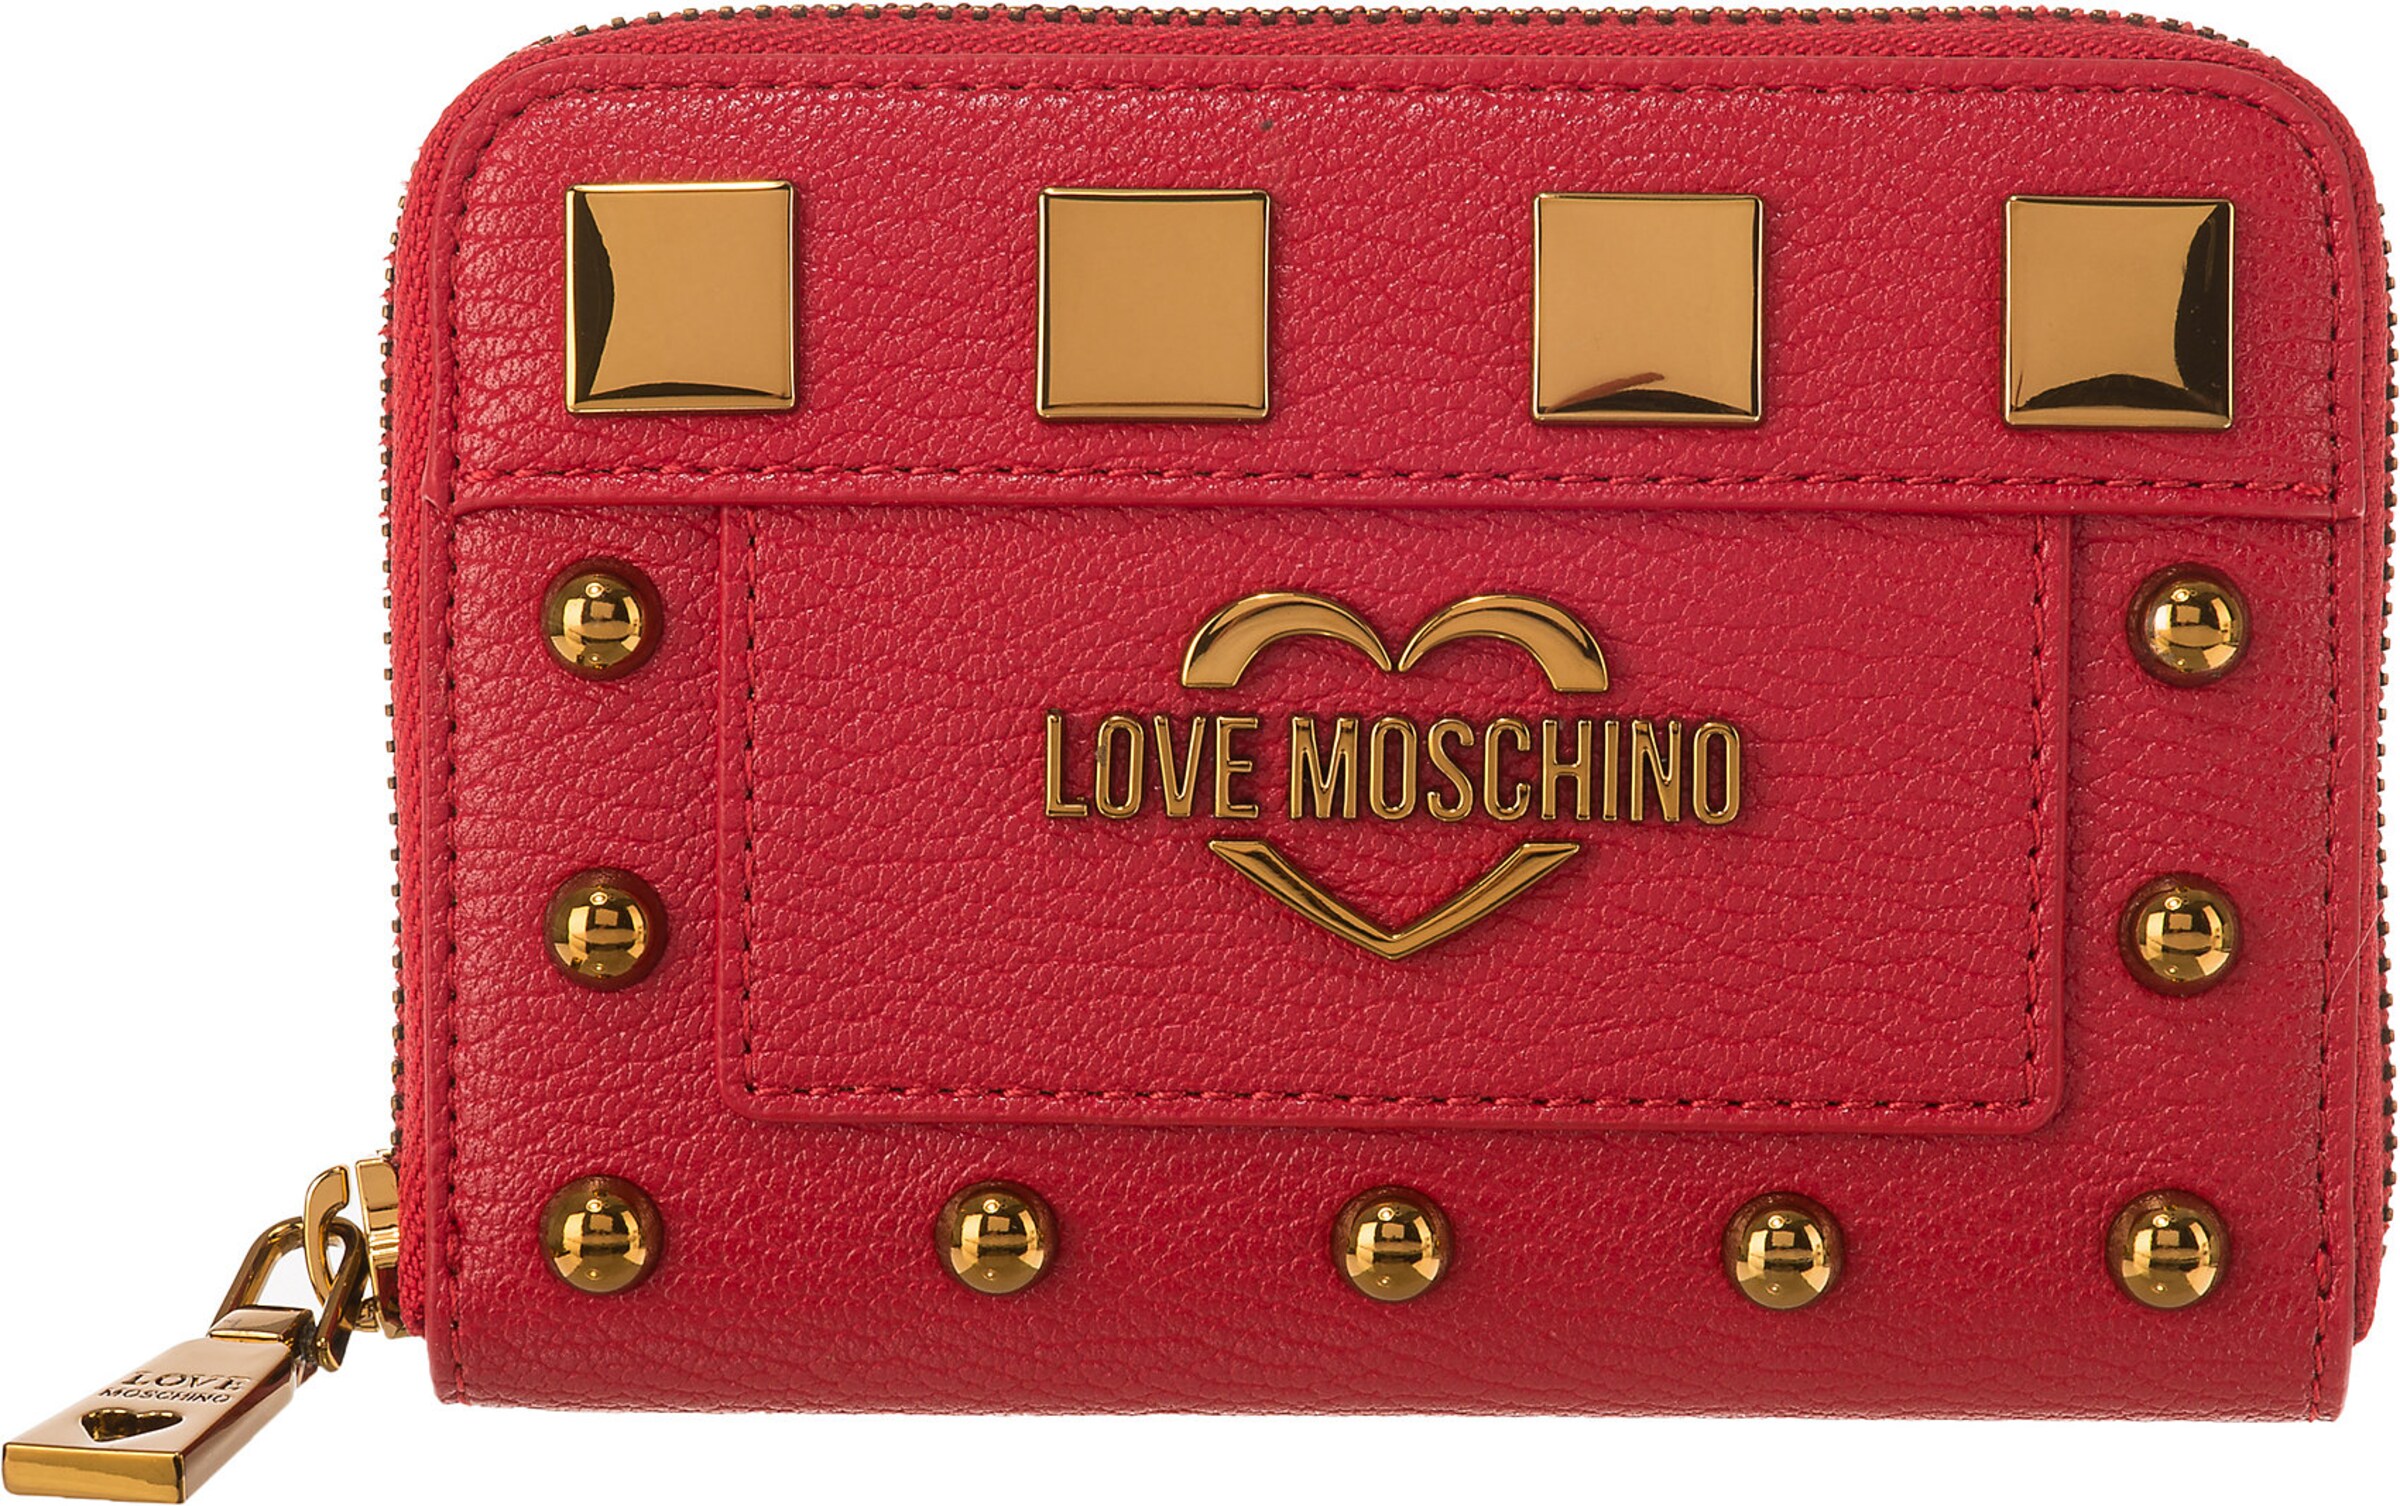 Love Moschino Portemonnaie in Rot 